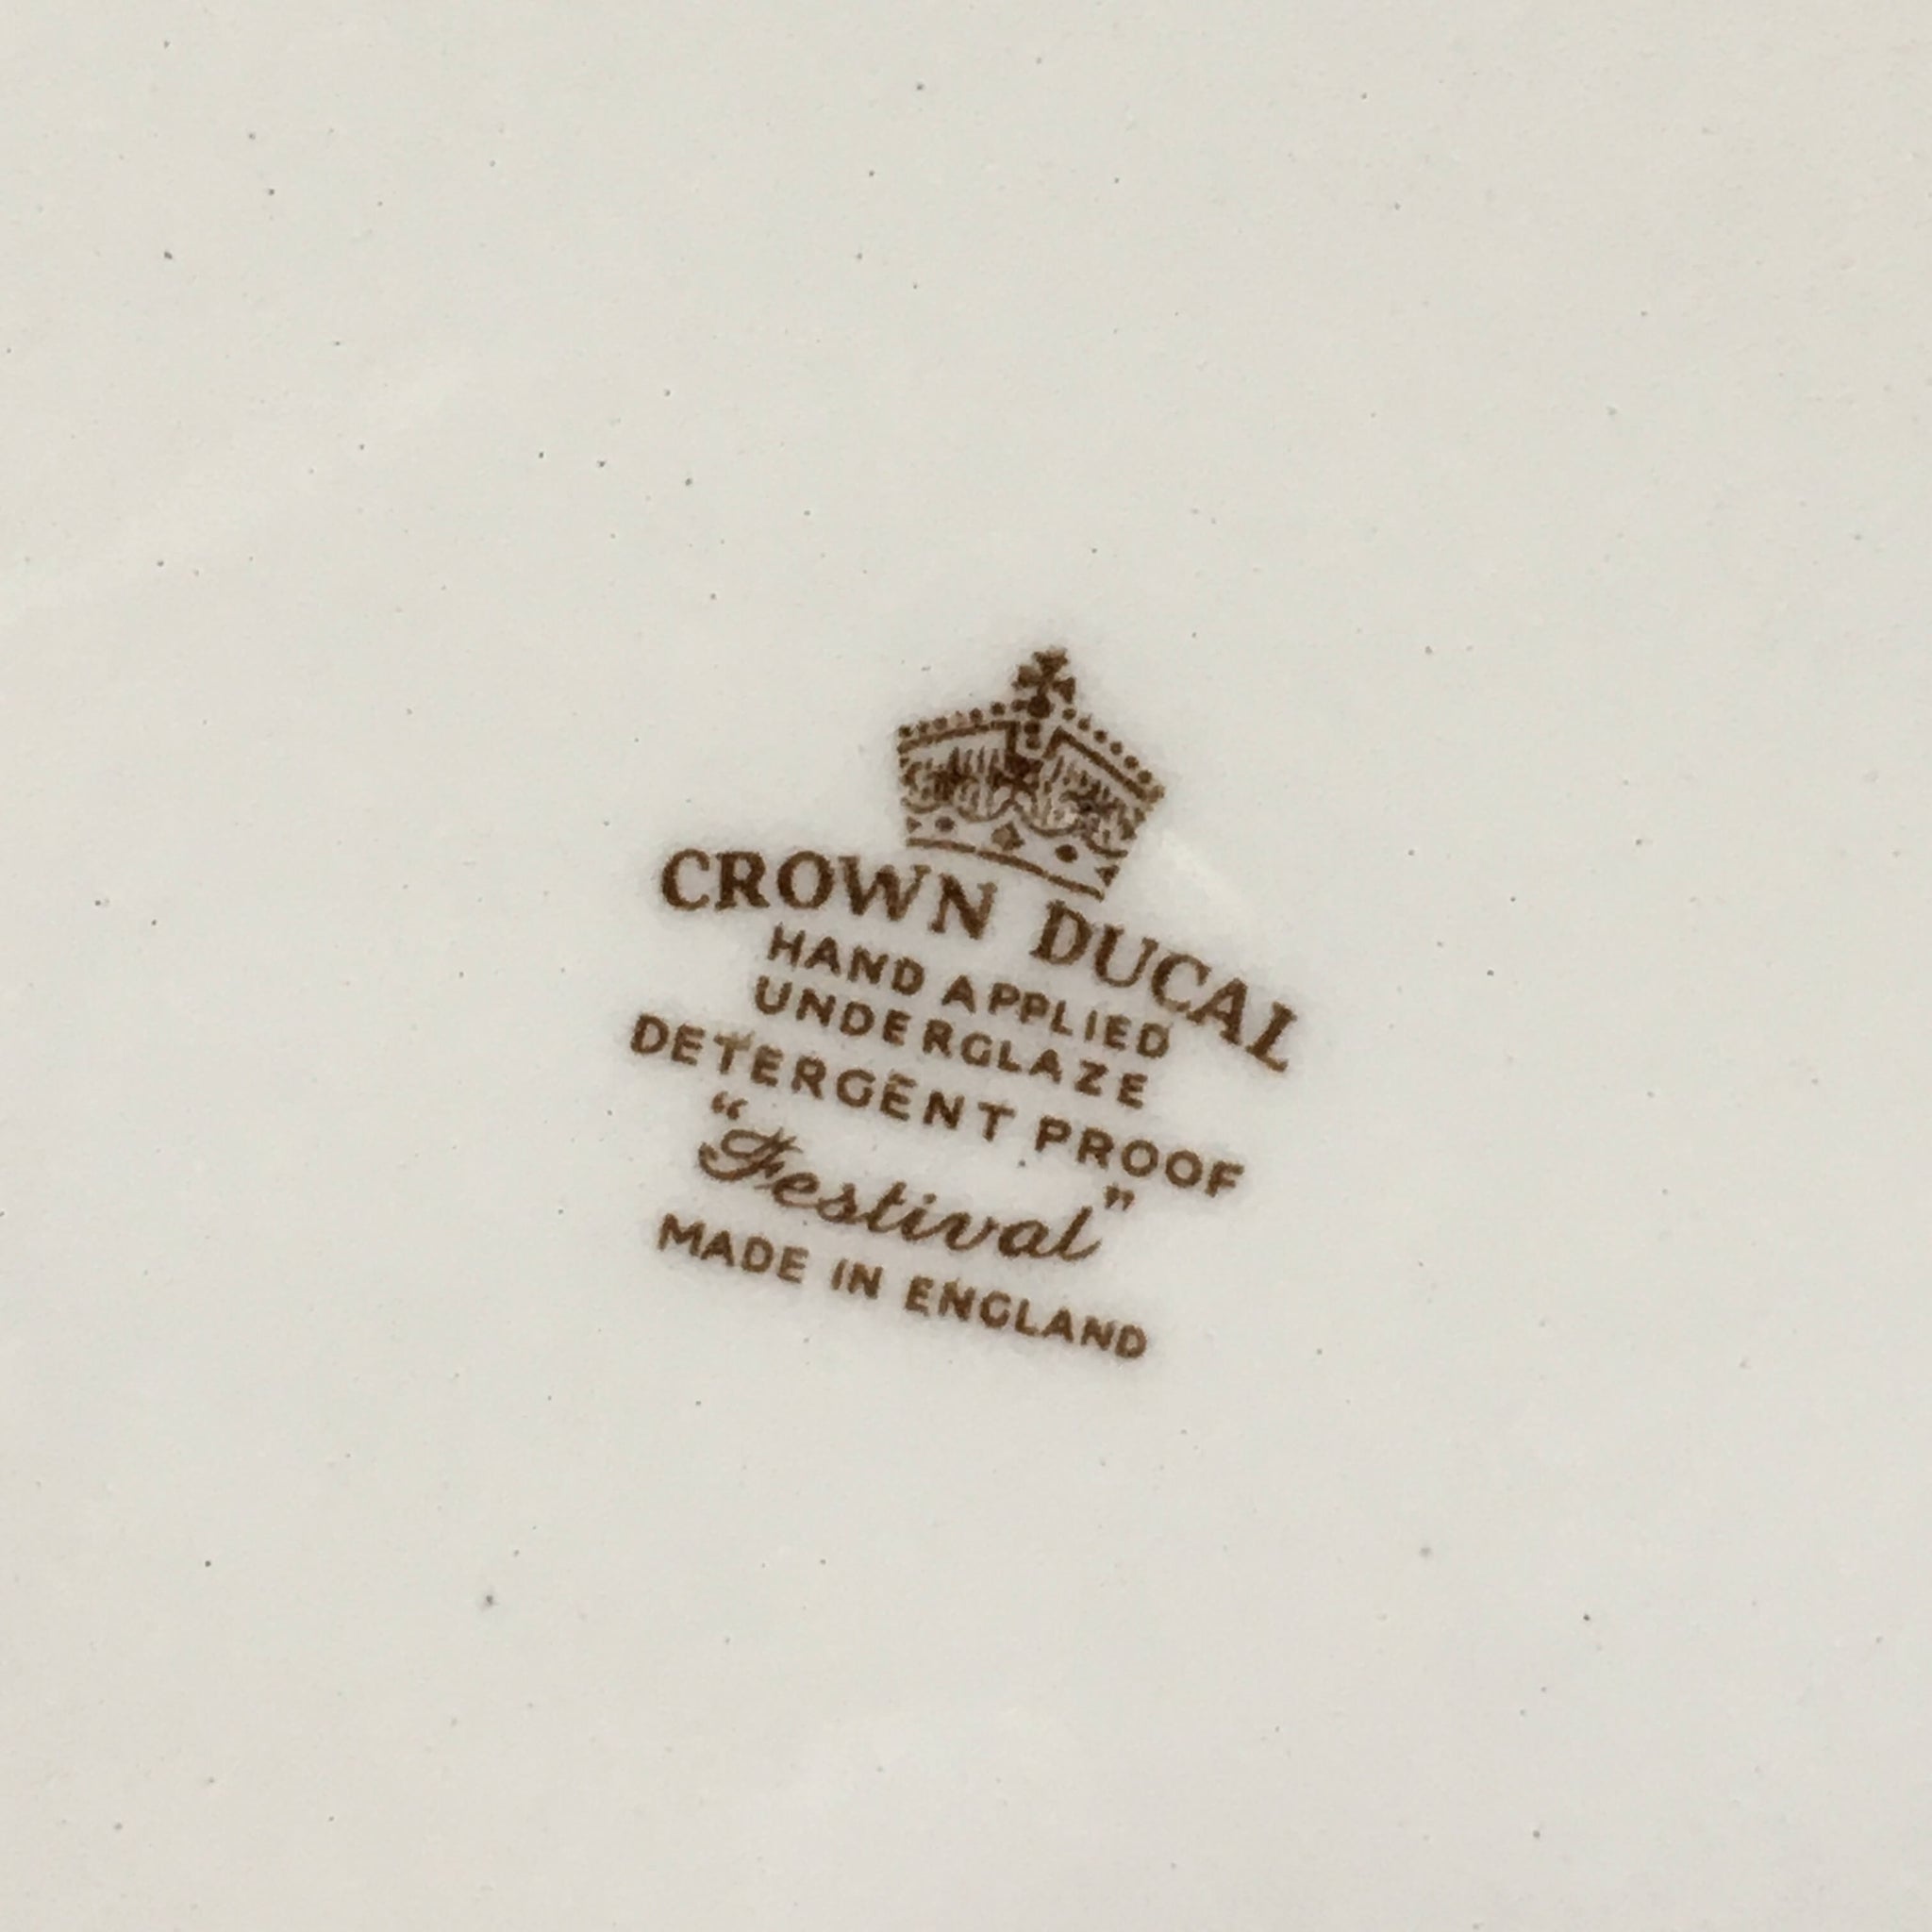 Vintage 1950s Crown Ducal Festival Pattern Plates - Set of 6 - Made in England